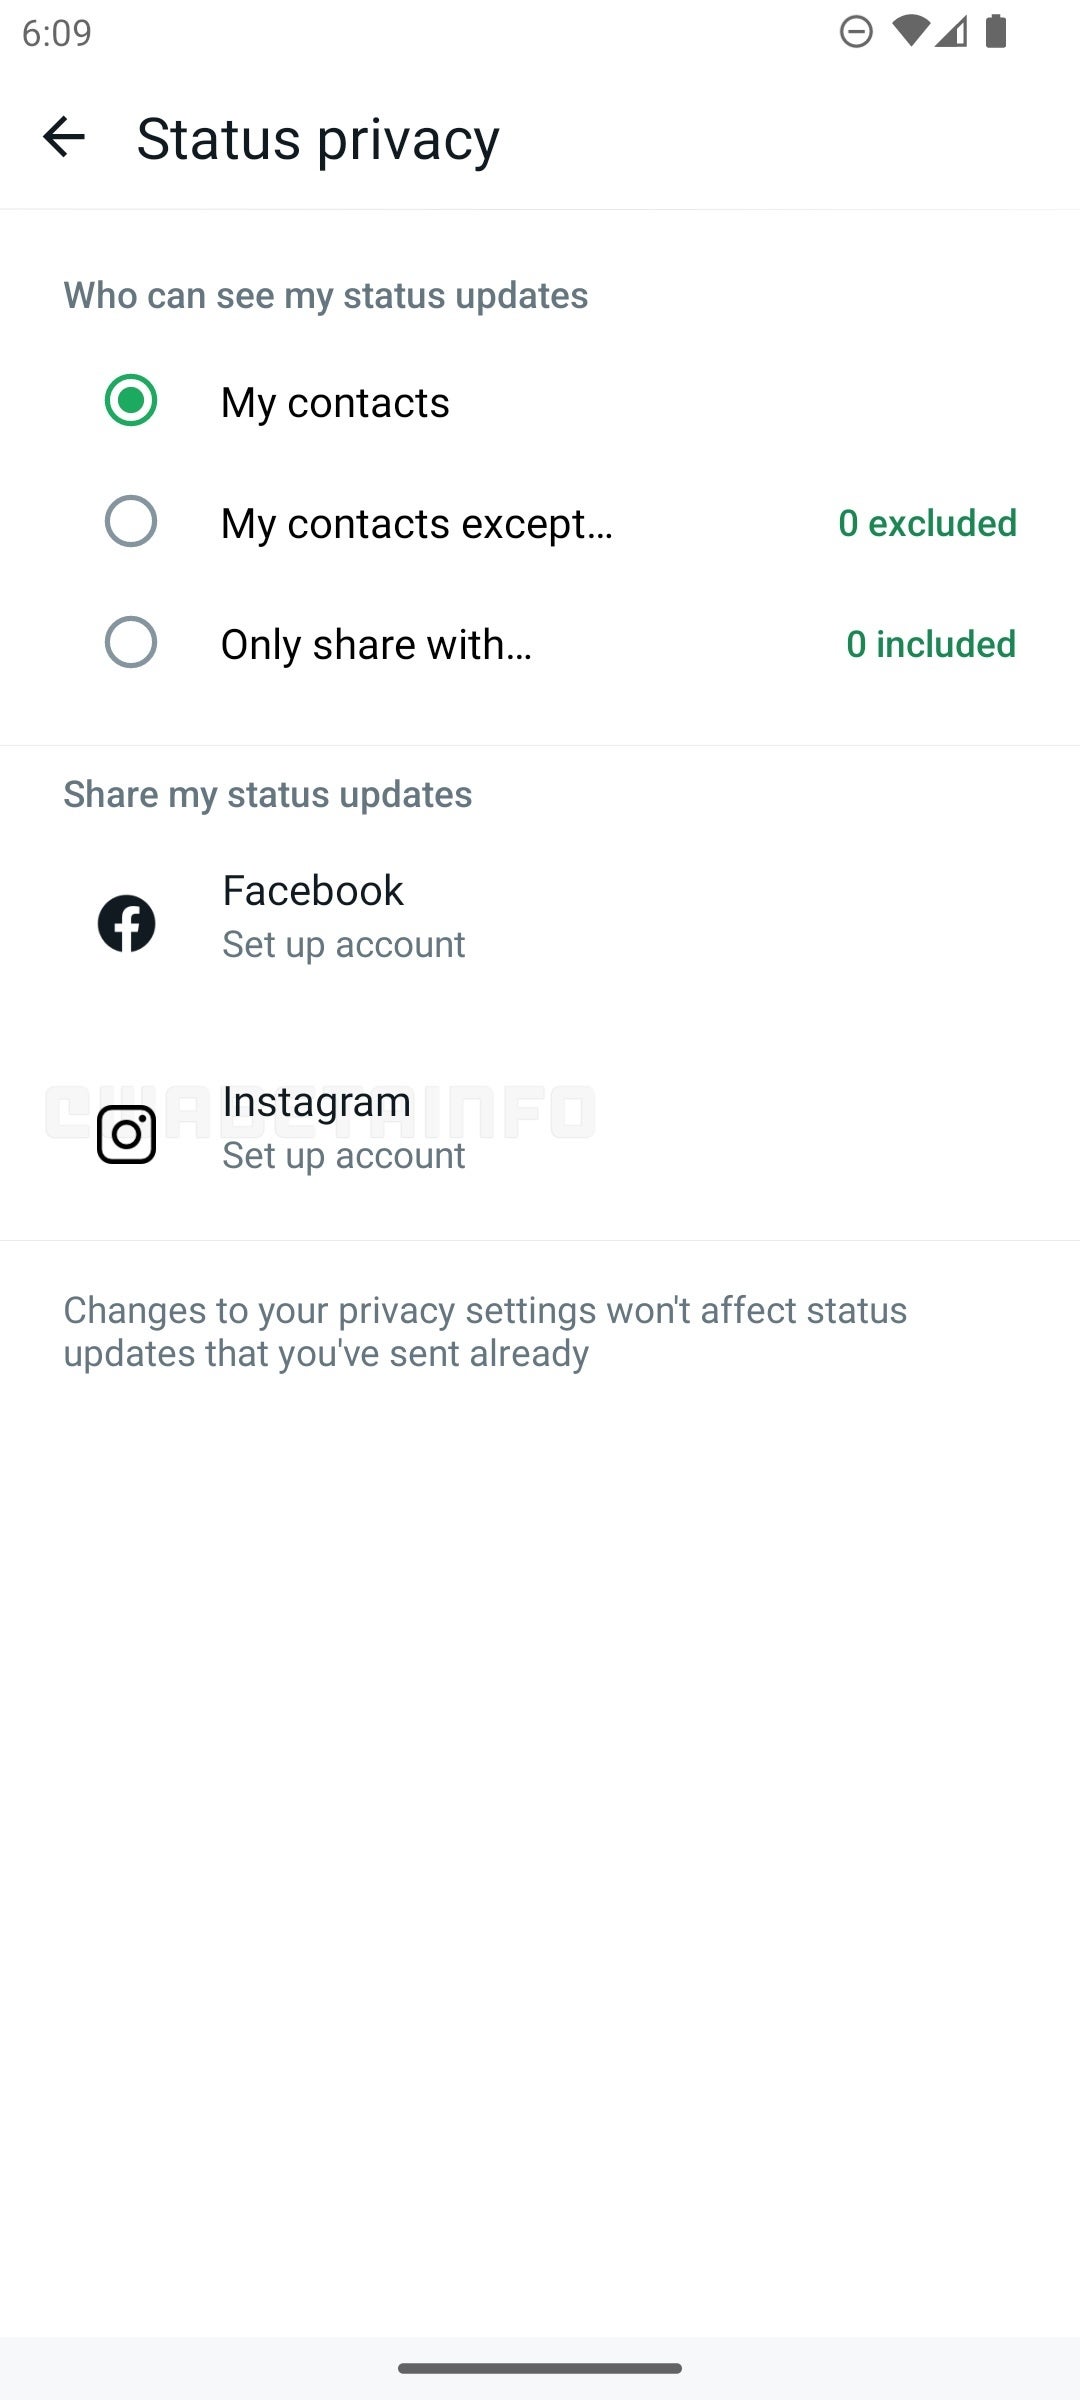 Image Credit–WABetaInfo - WhatsApp to integrate with Instagram, allowing users to share status updates